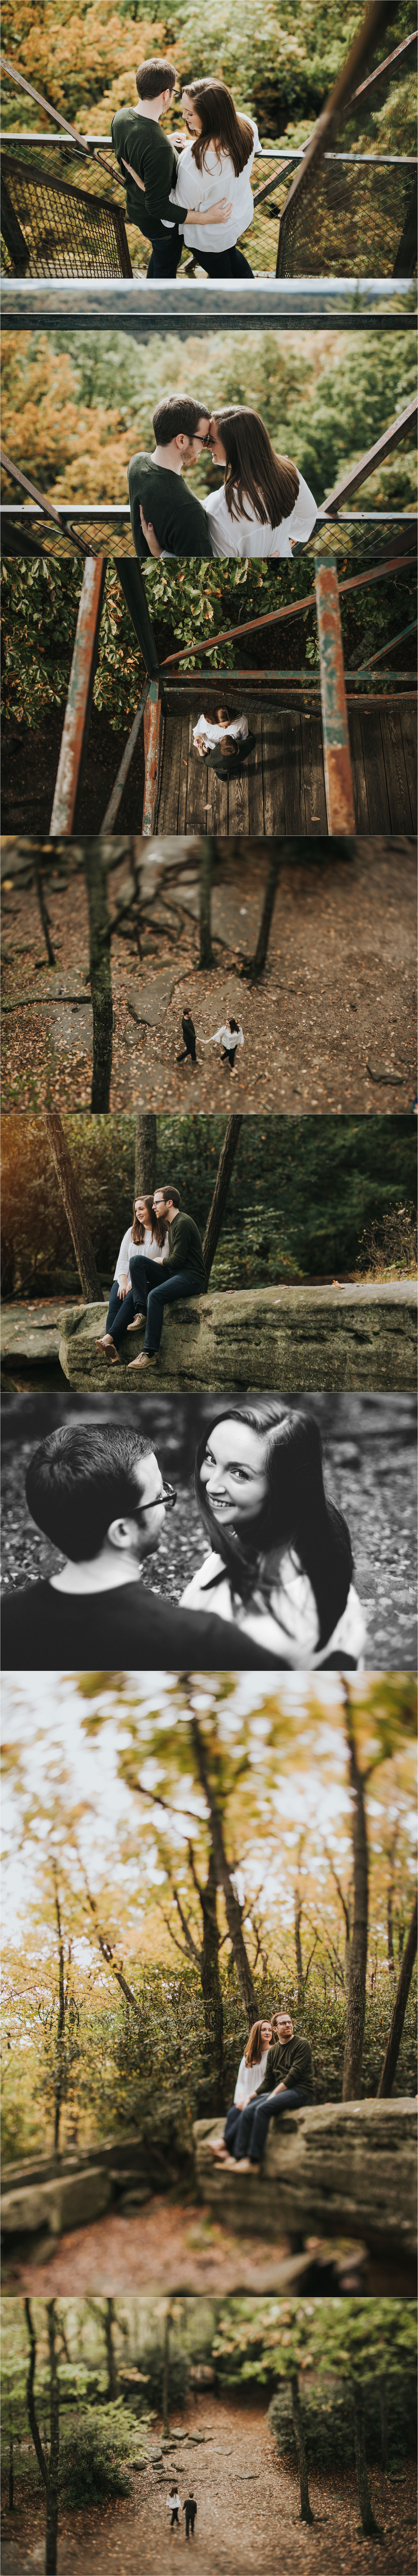 01-cook-forest-engagement-session-in-the-fall.jpg